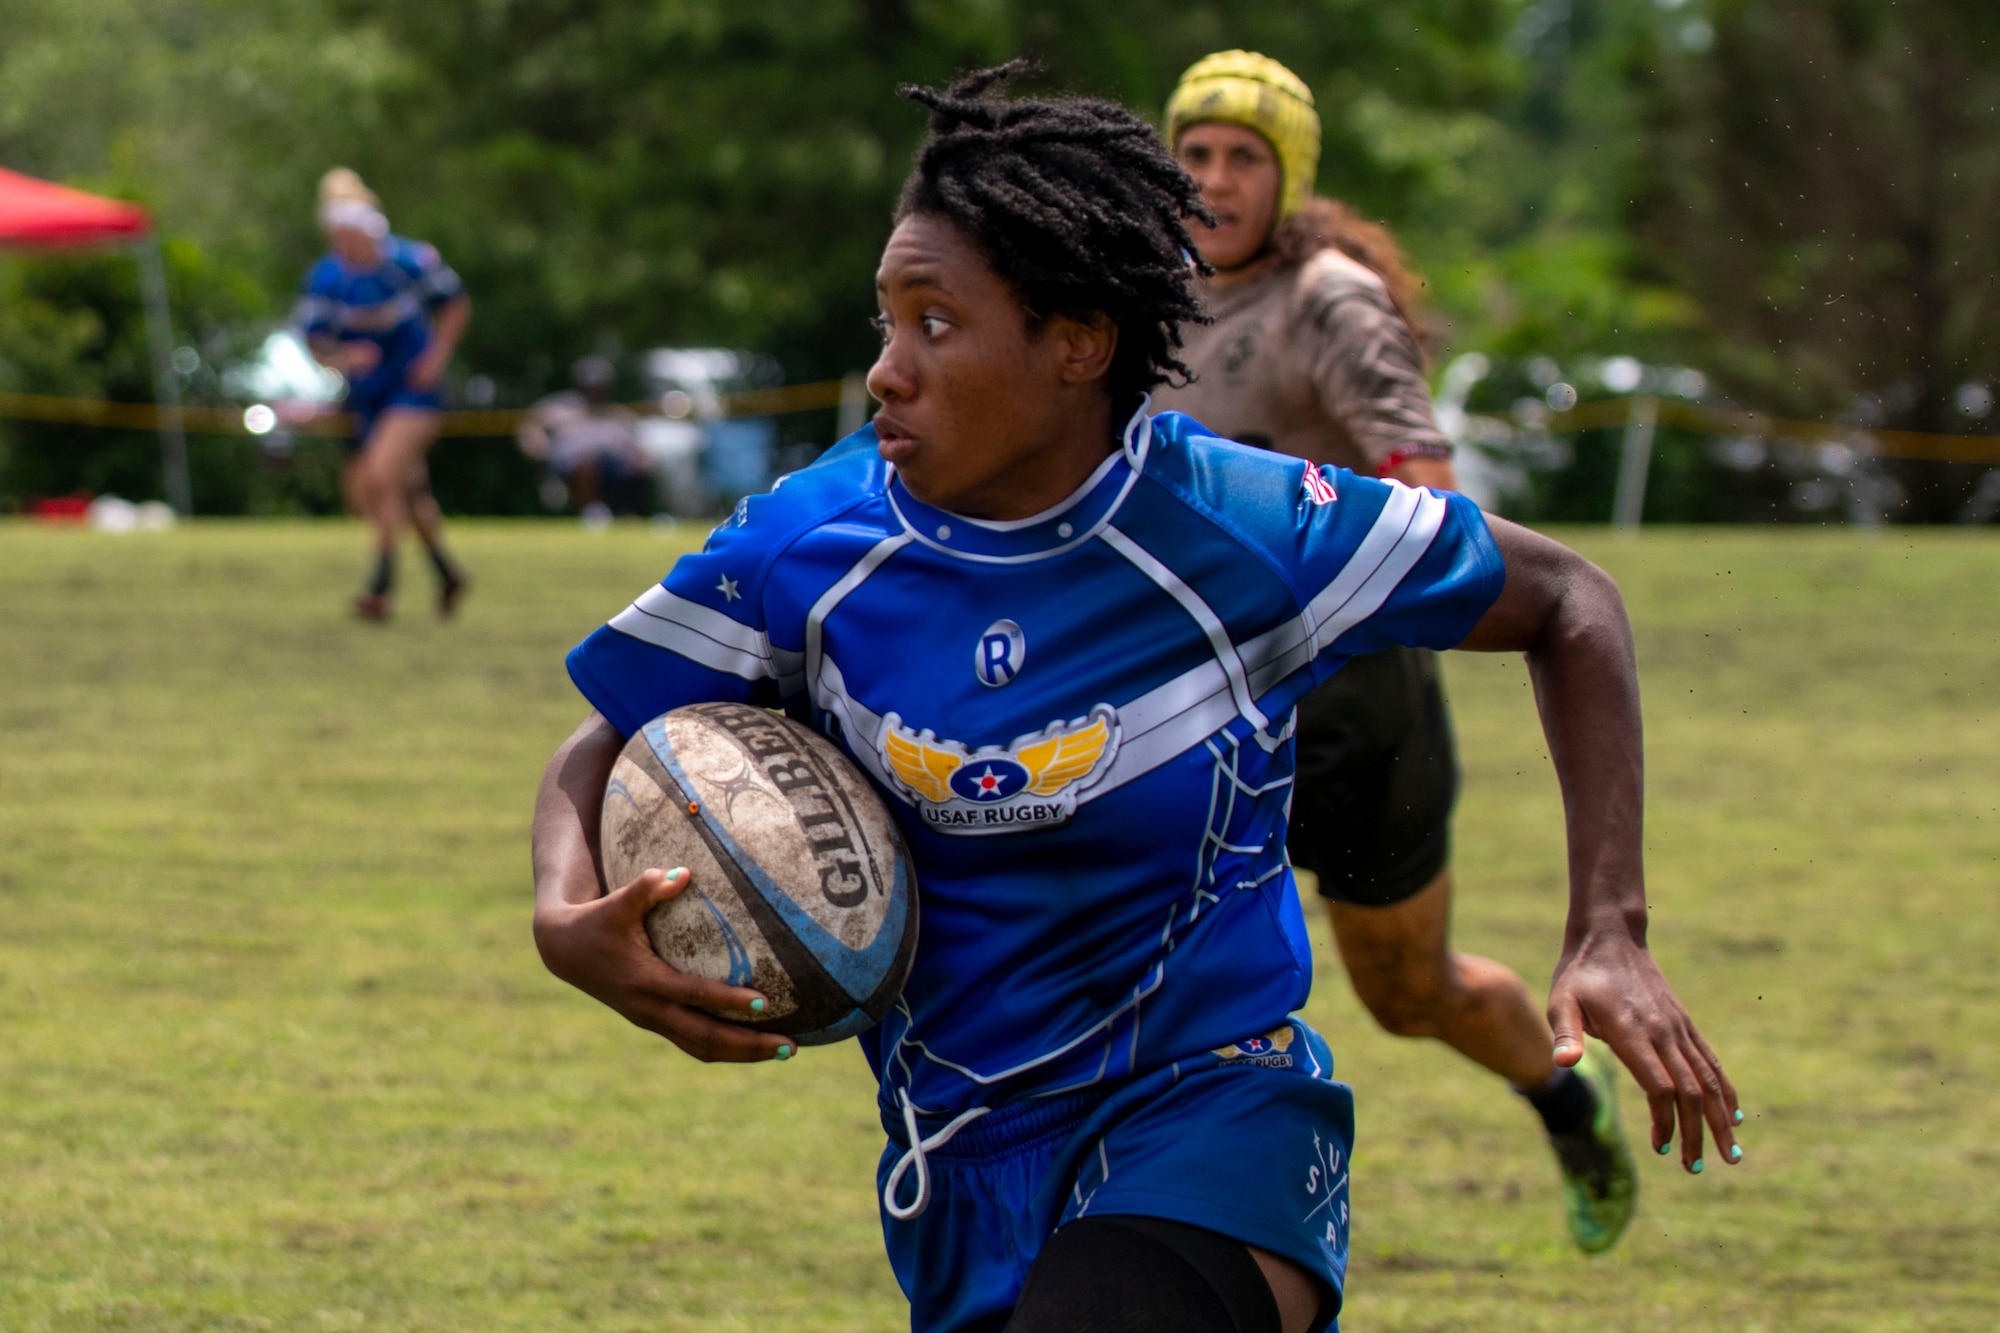 Staff Sgt. Cheryl Johnson, United States Air Force rugby player, runs with the ball at the Annual Armed Forces Women’s Rugby Championship in Wilmington, North Carolina, June 26, 2021.